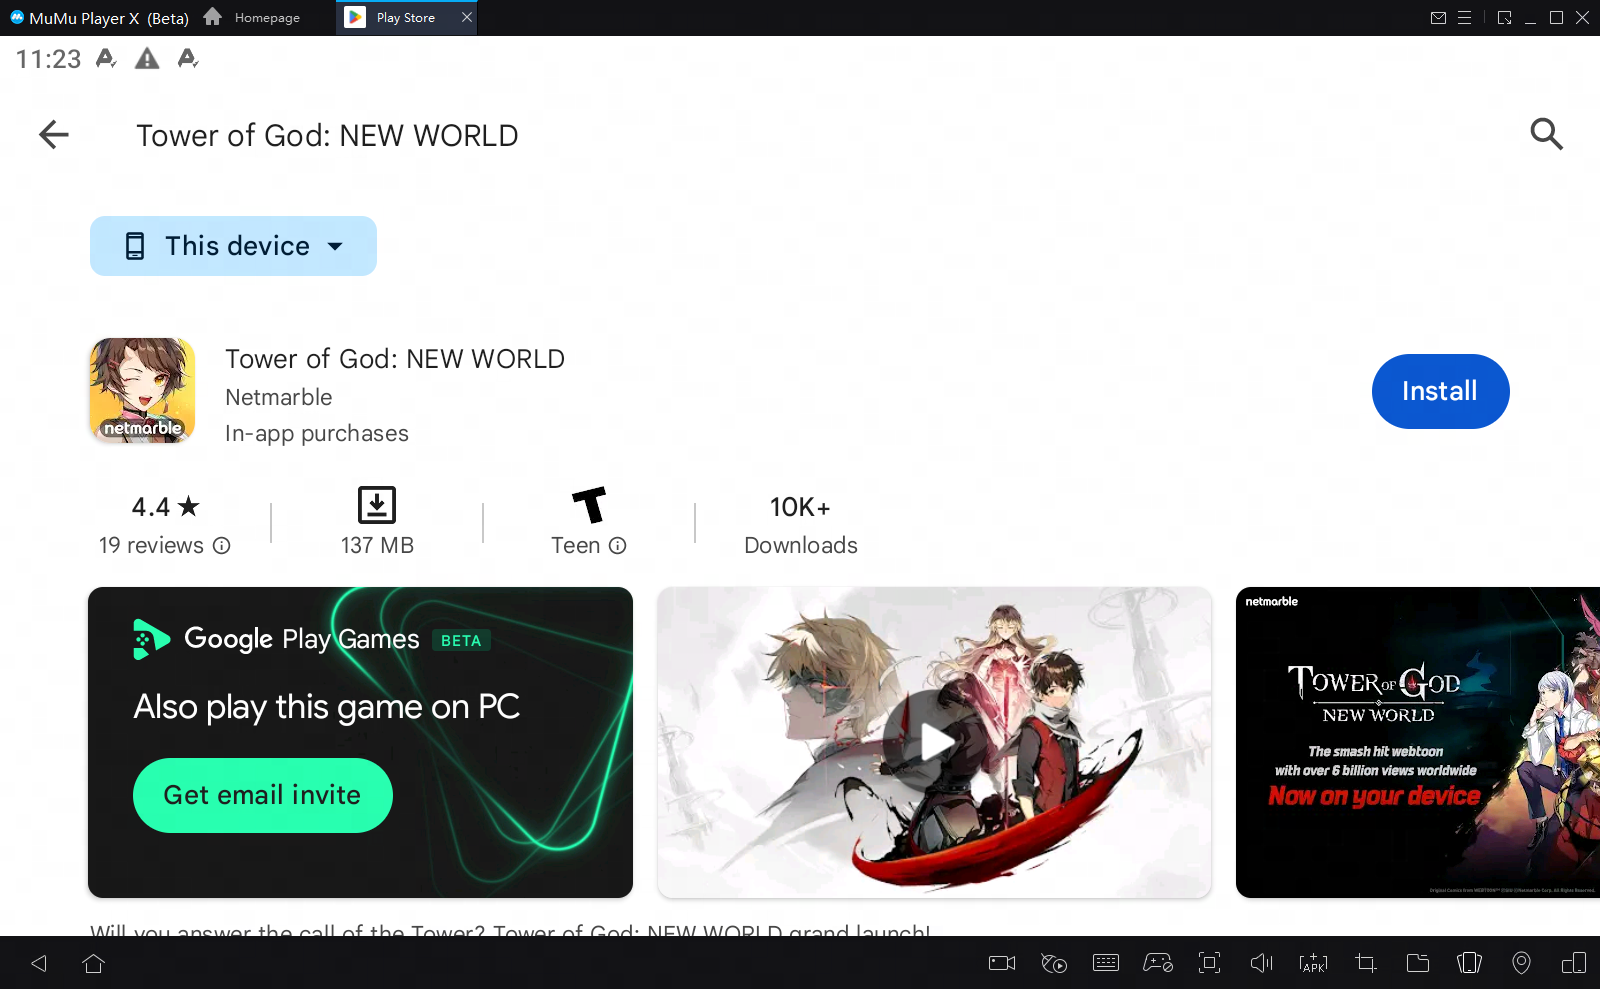 Tower of God: New World on PC